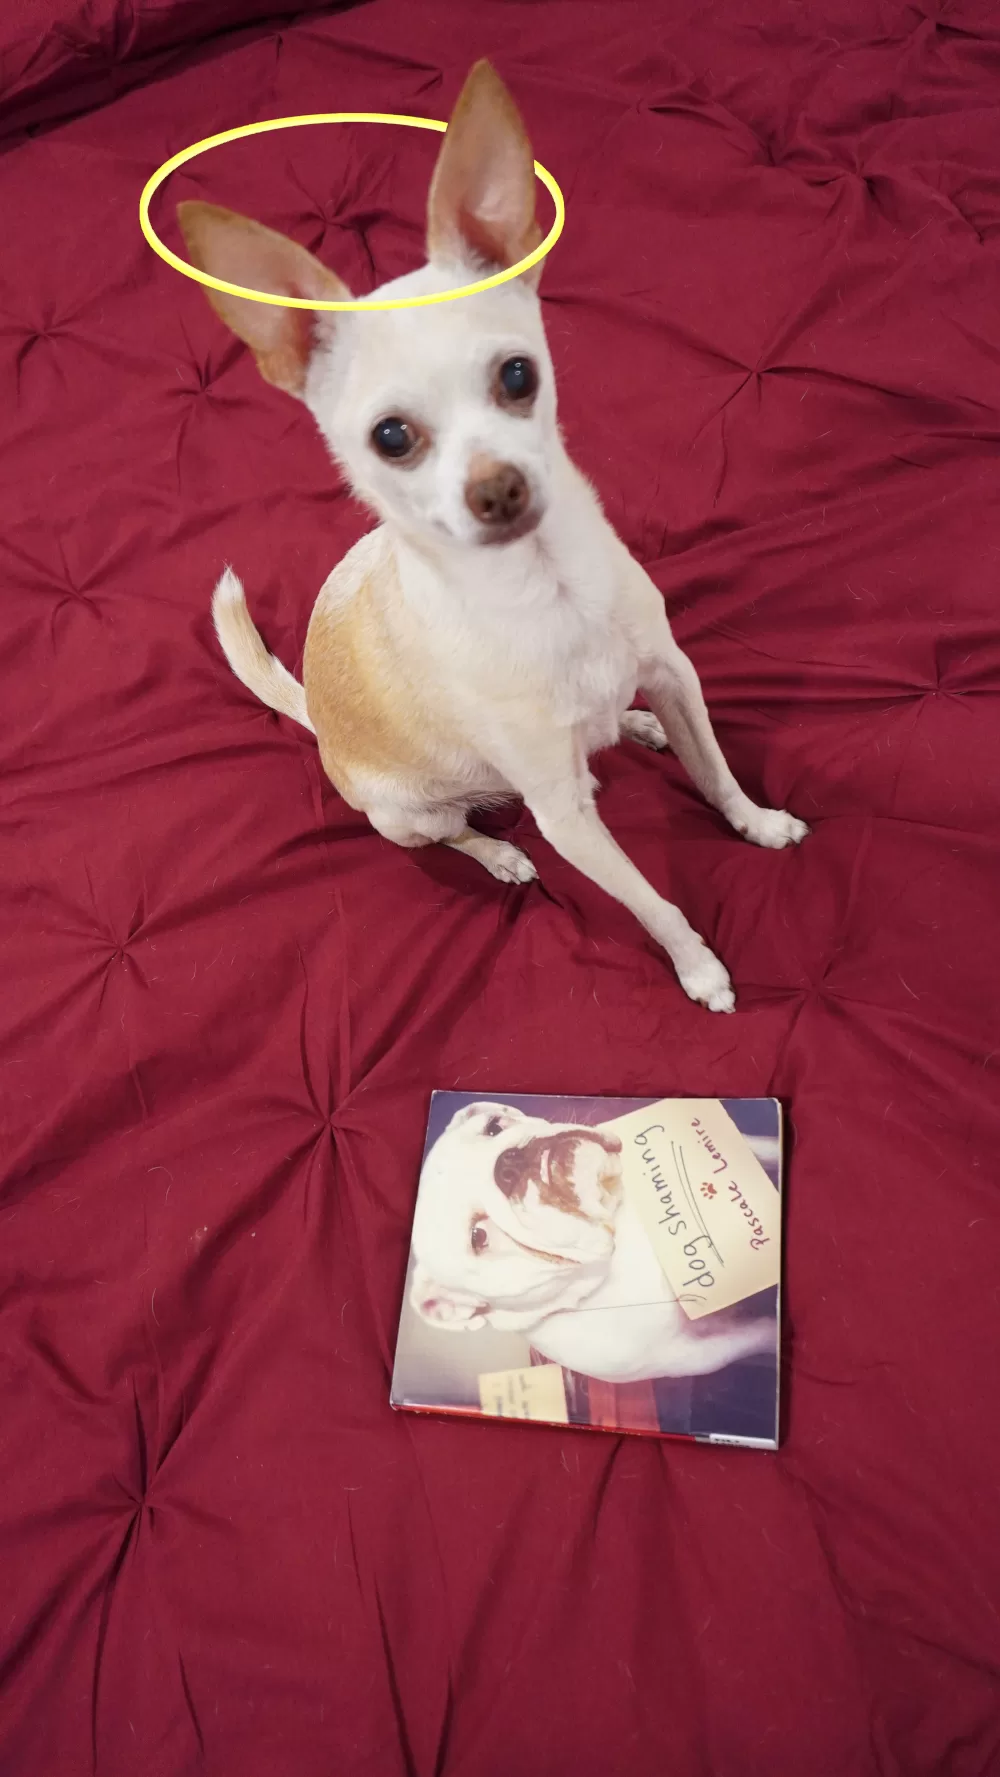 dog shaming book and a chihuahua with a halo.